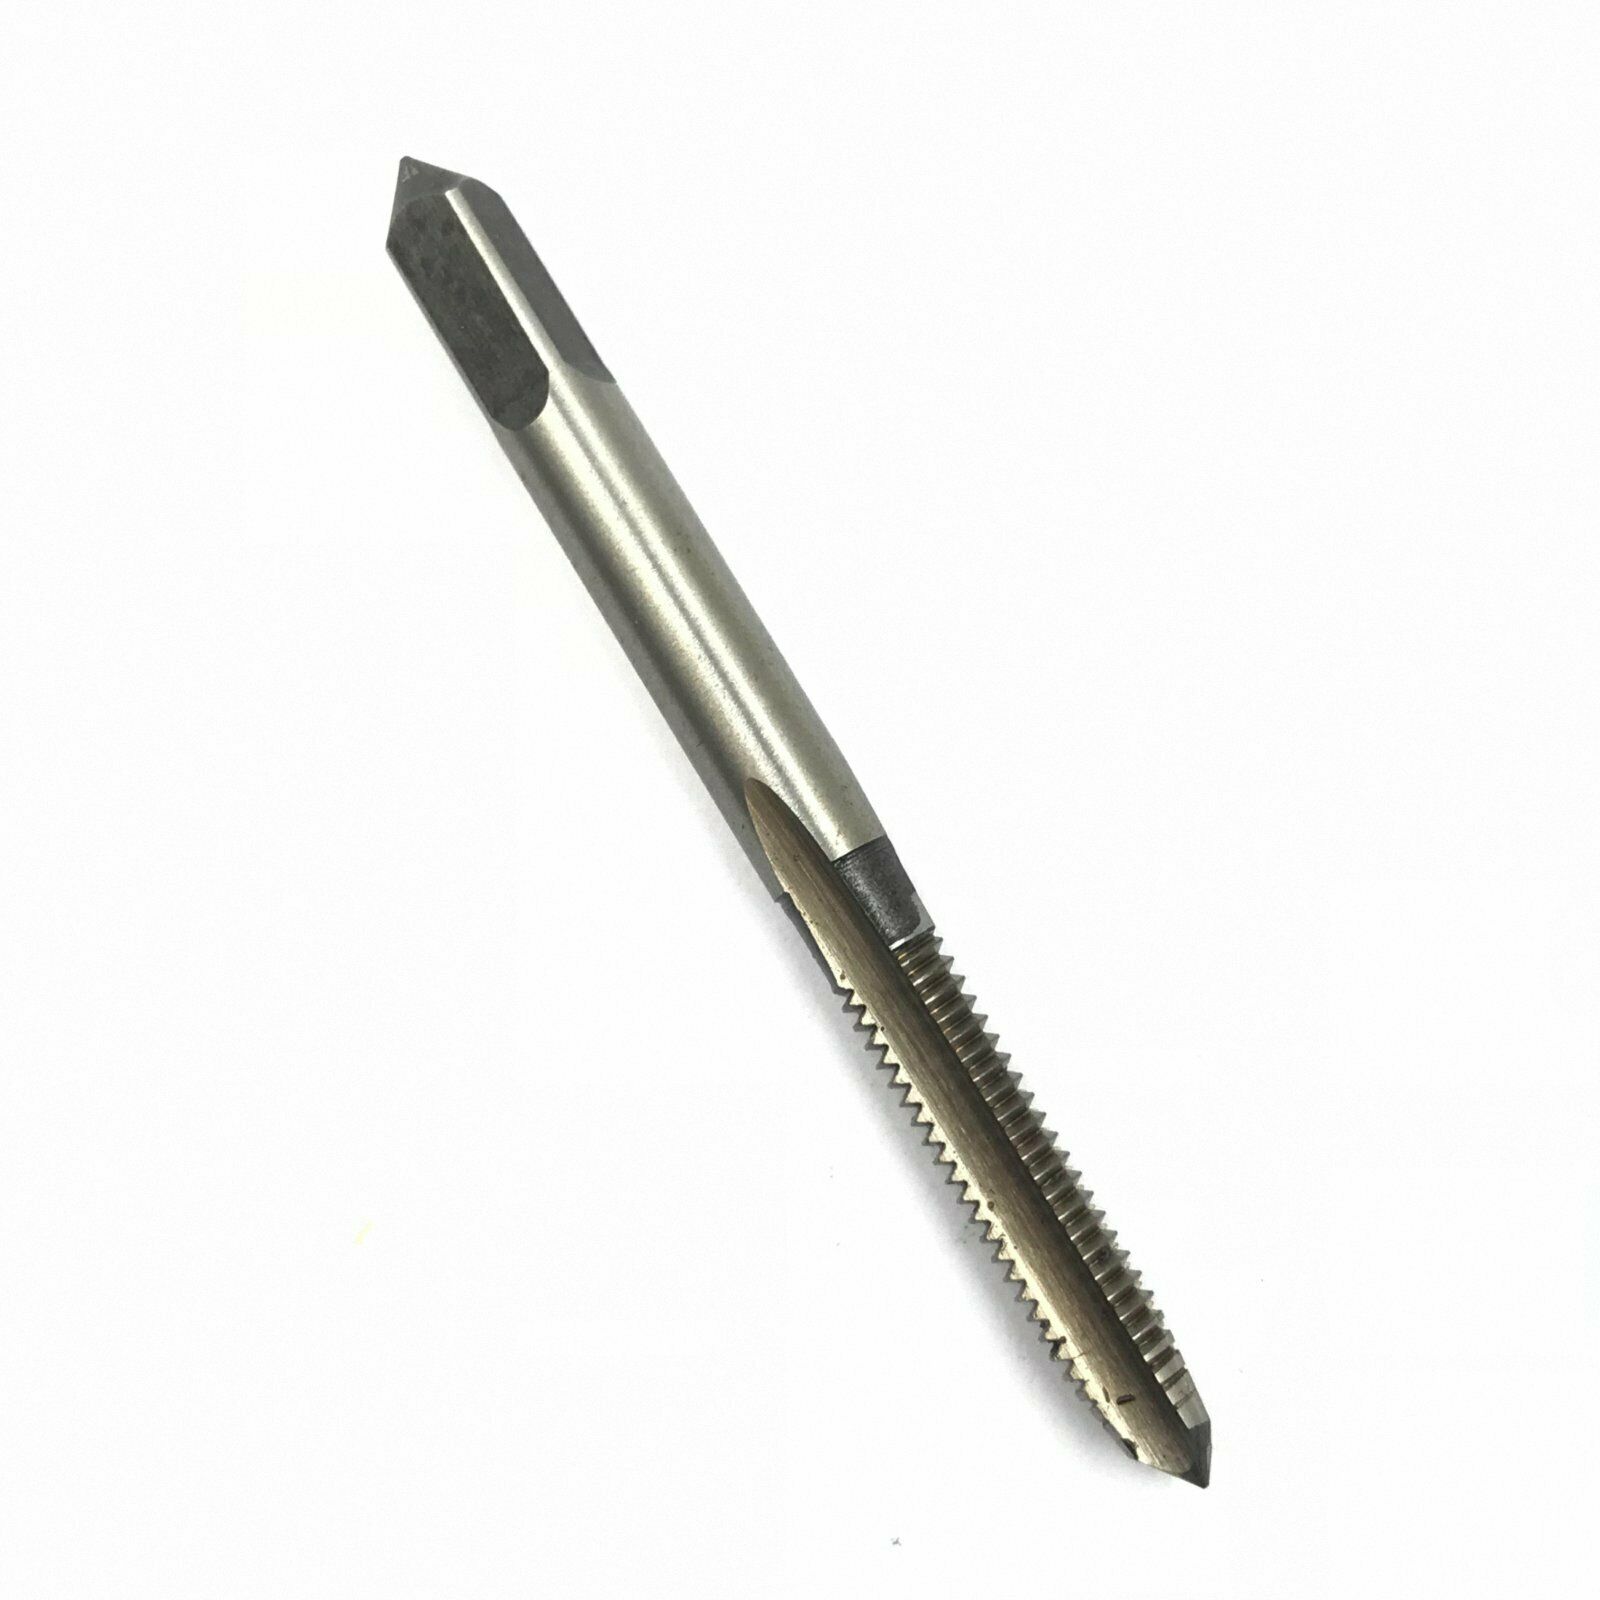 1 of M5 x 0.8mm Pitch Metric HSS Right hand Tap [M_M_S]